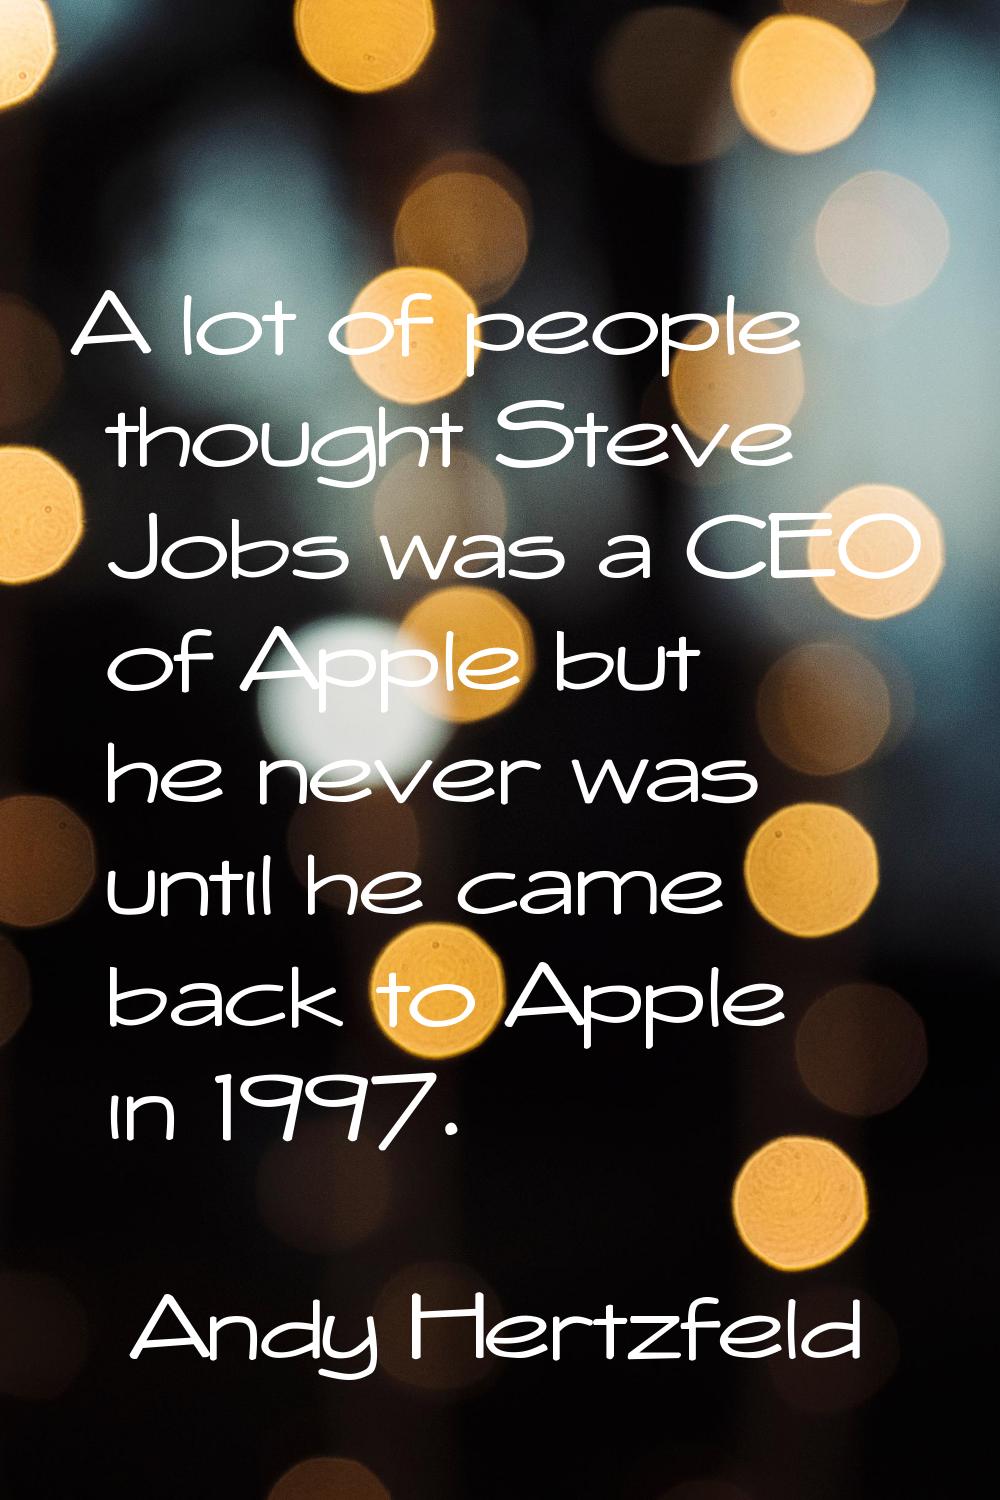 A lot of people thought Steve Jobs was a CEO of Apple but he never was until he came back to Apple 